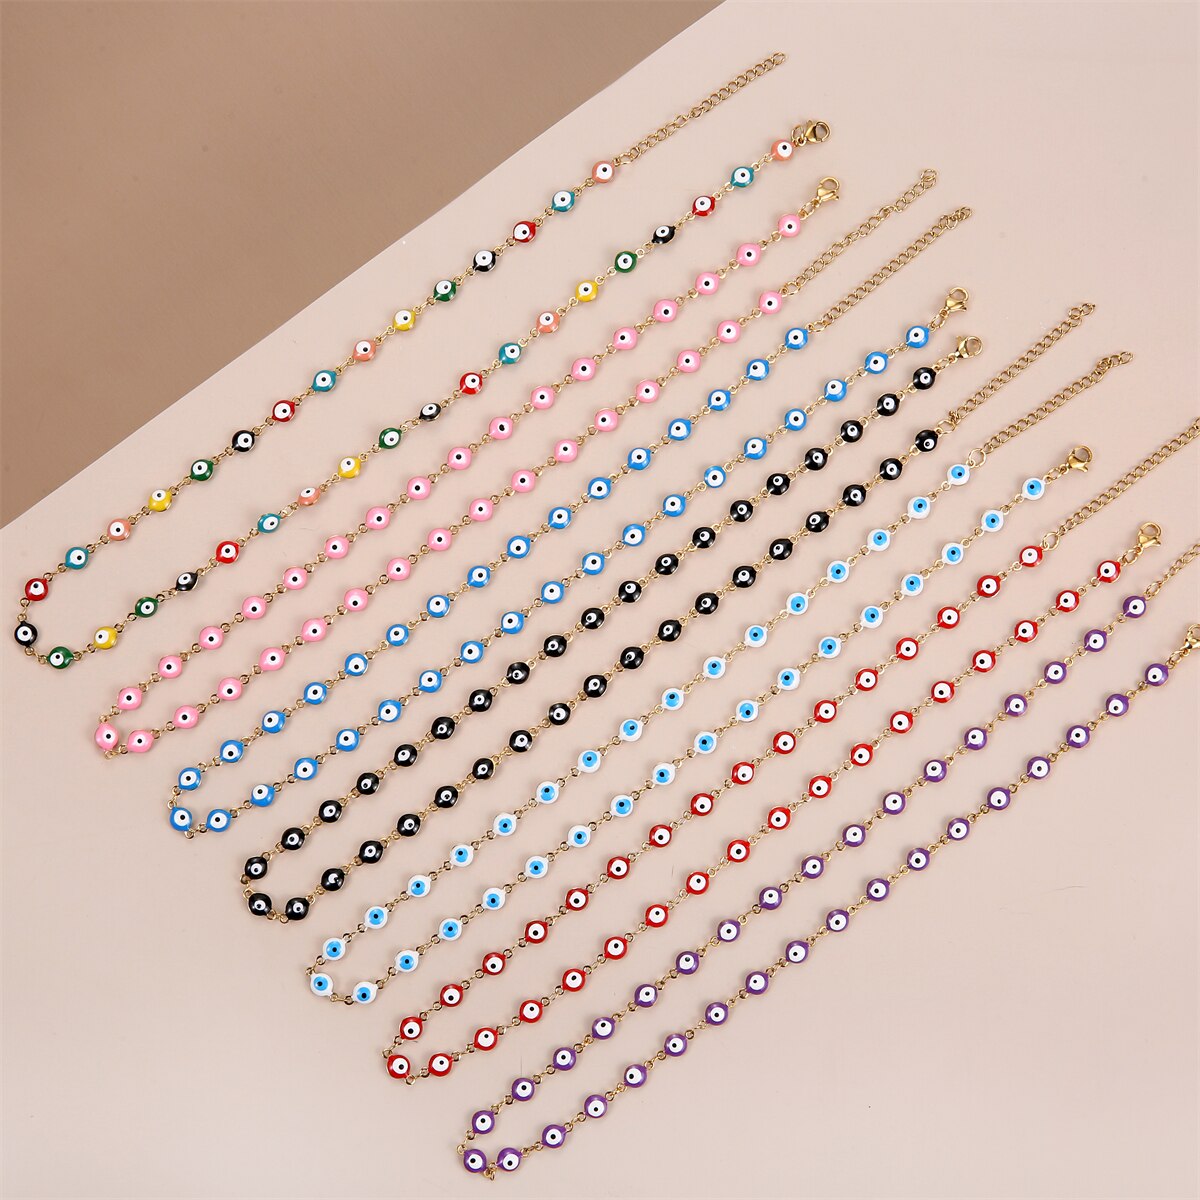 Simple Fashion Evil Eye Beads Chain Choker Necklace for Women Girls Gold Color Stainless Steel Necklace Jewelry Accessories